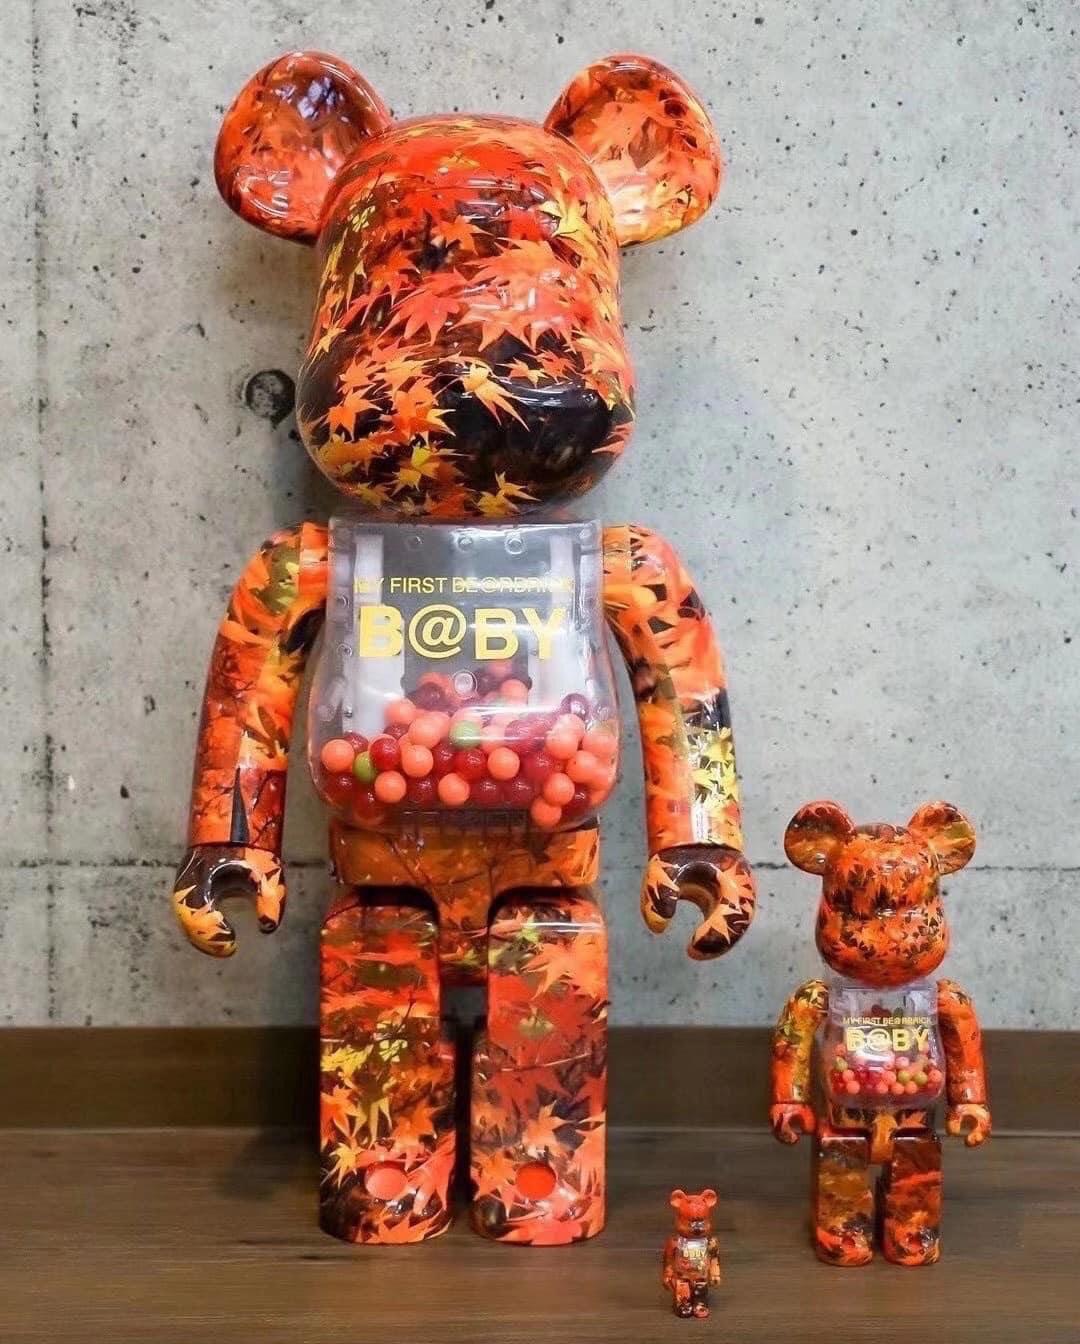 MY FIRST BE@RBRICK B@BY AUTUMN LEAVESver - おもちゃ